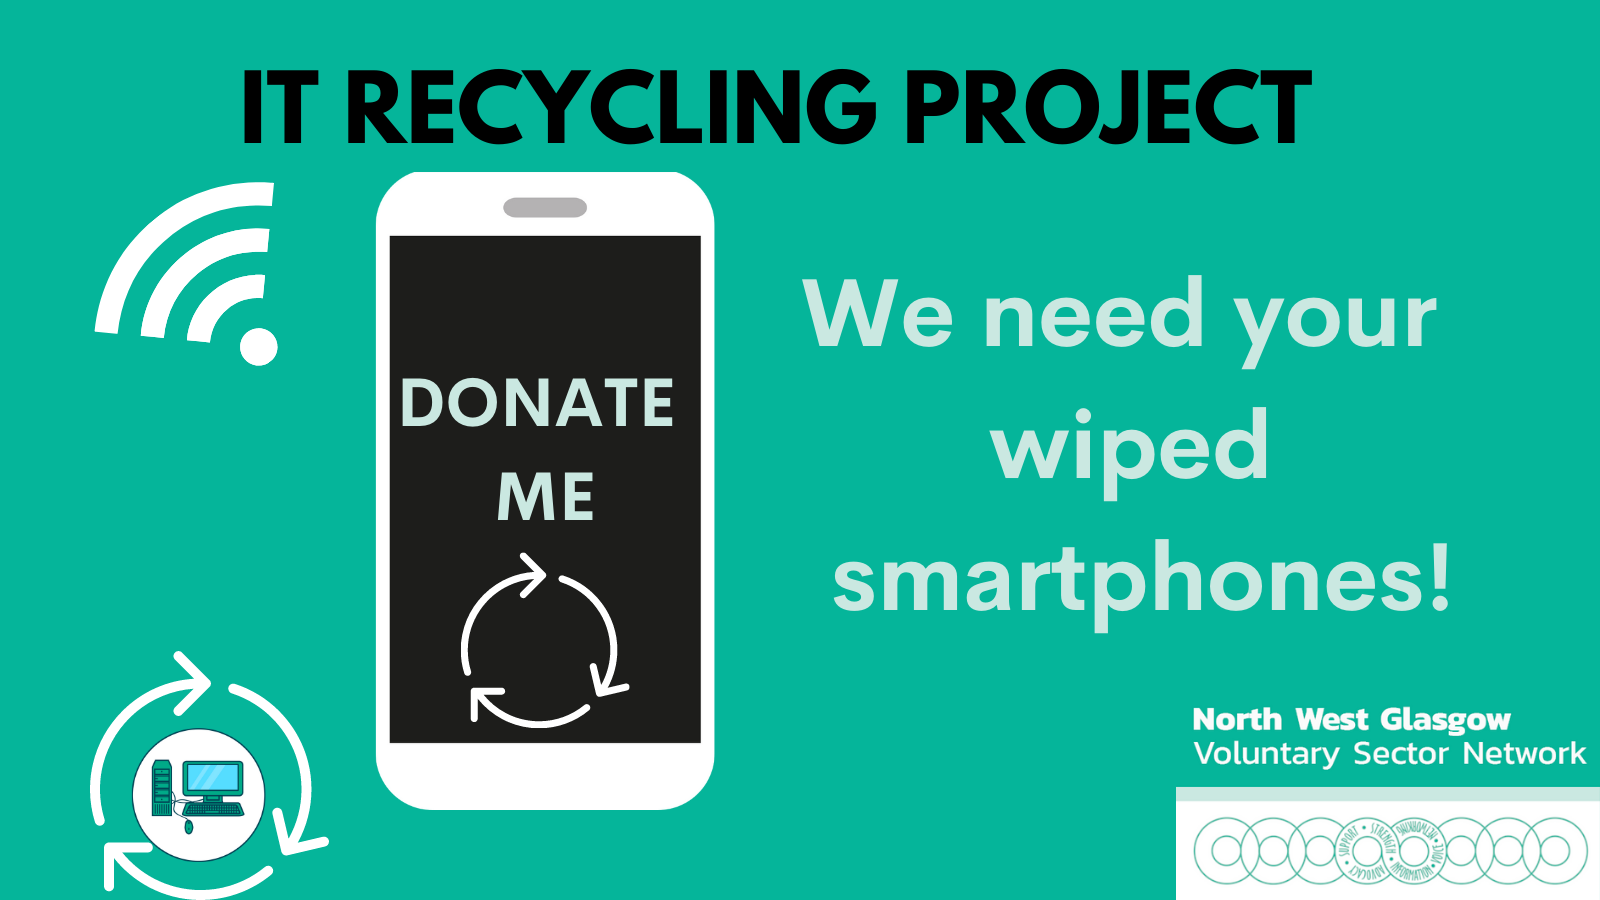 IT Recycling project poster with mobile phone picture & We need your wiped smartphones text